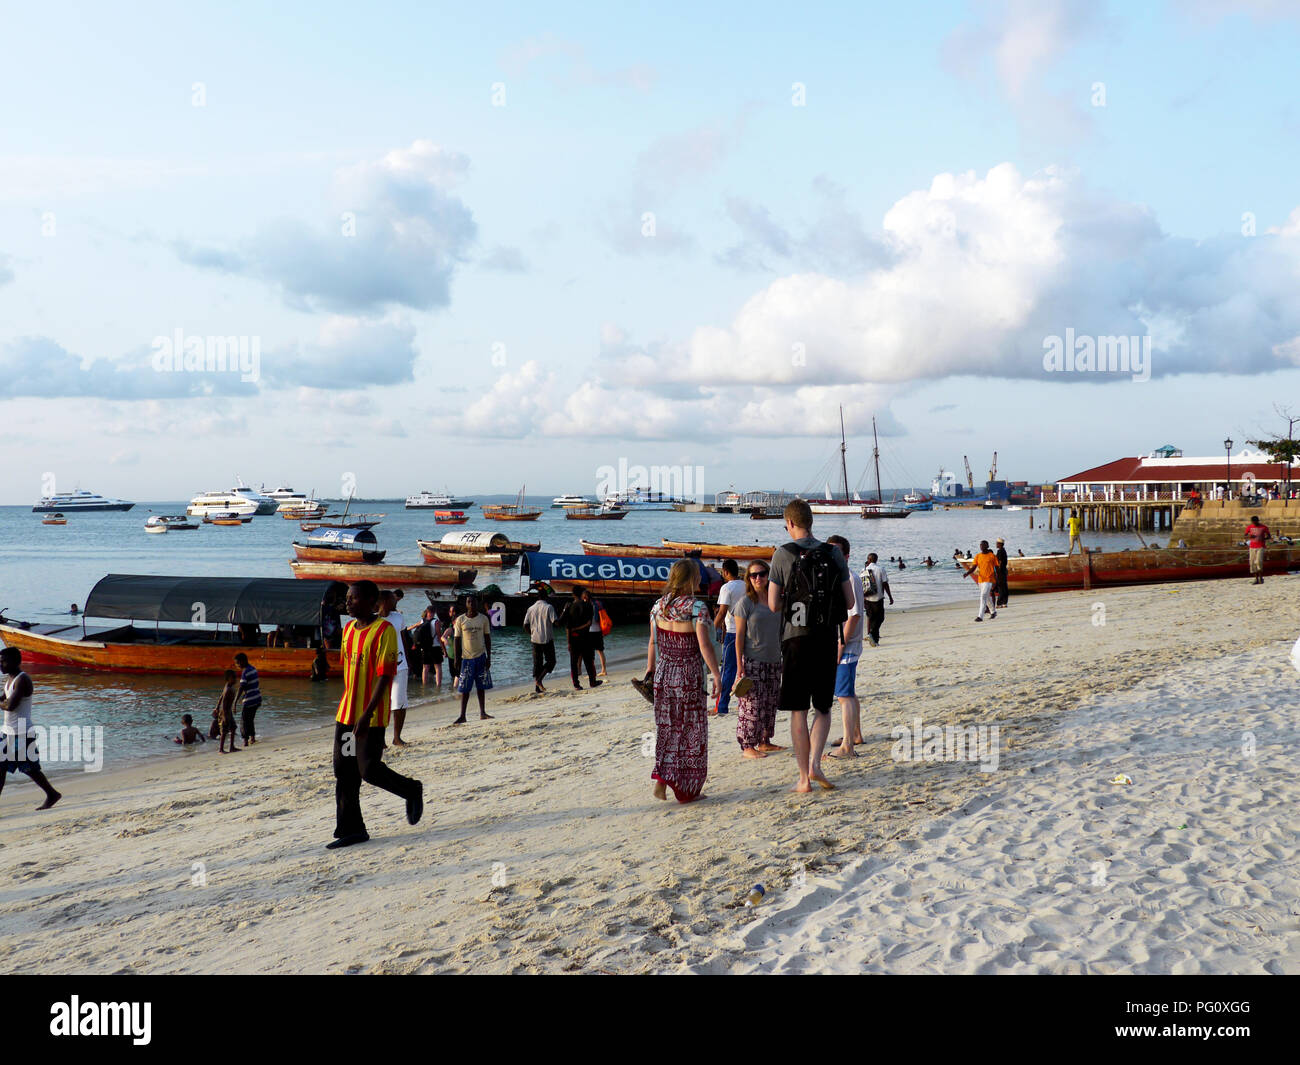 People and tourists on the beach in Stone Town, Zanzibar, Africa Stock Photo